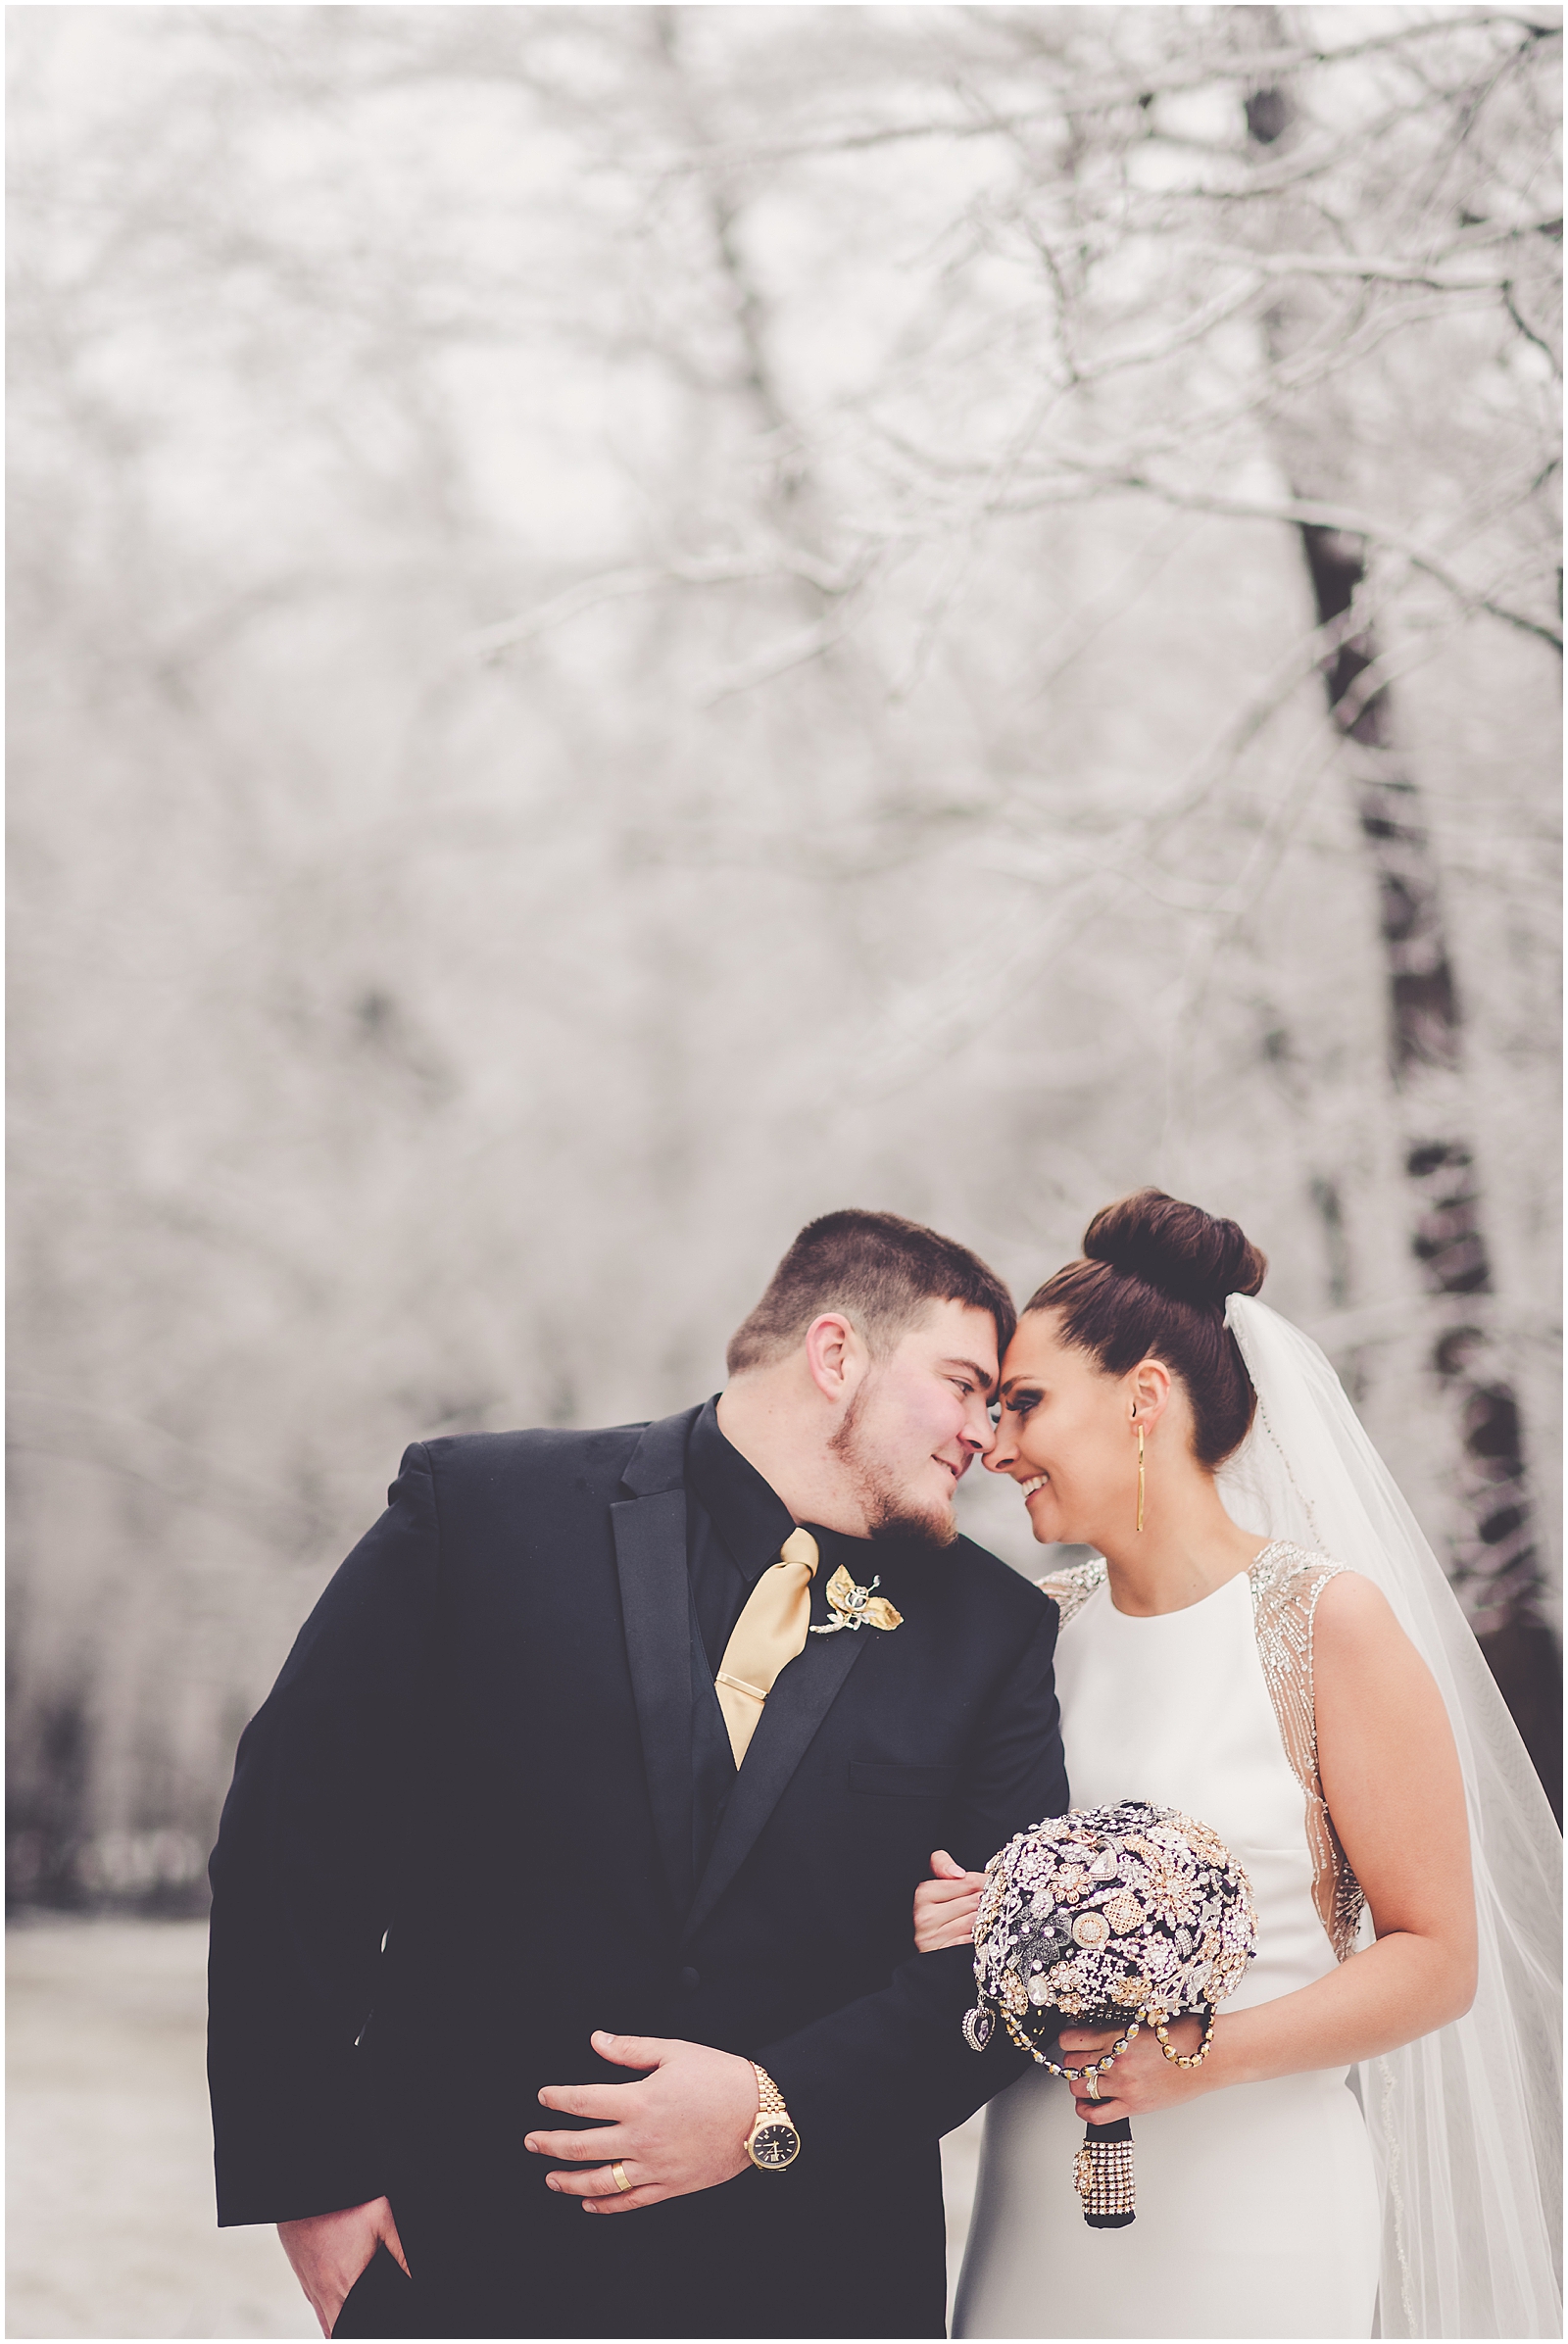 Holly and Kolton's snowy winter wedding day at The Longbranch in L'erable with Chicagoland wedding photographer Kara Evans Photographer.